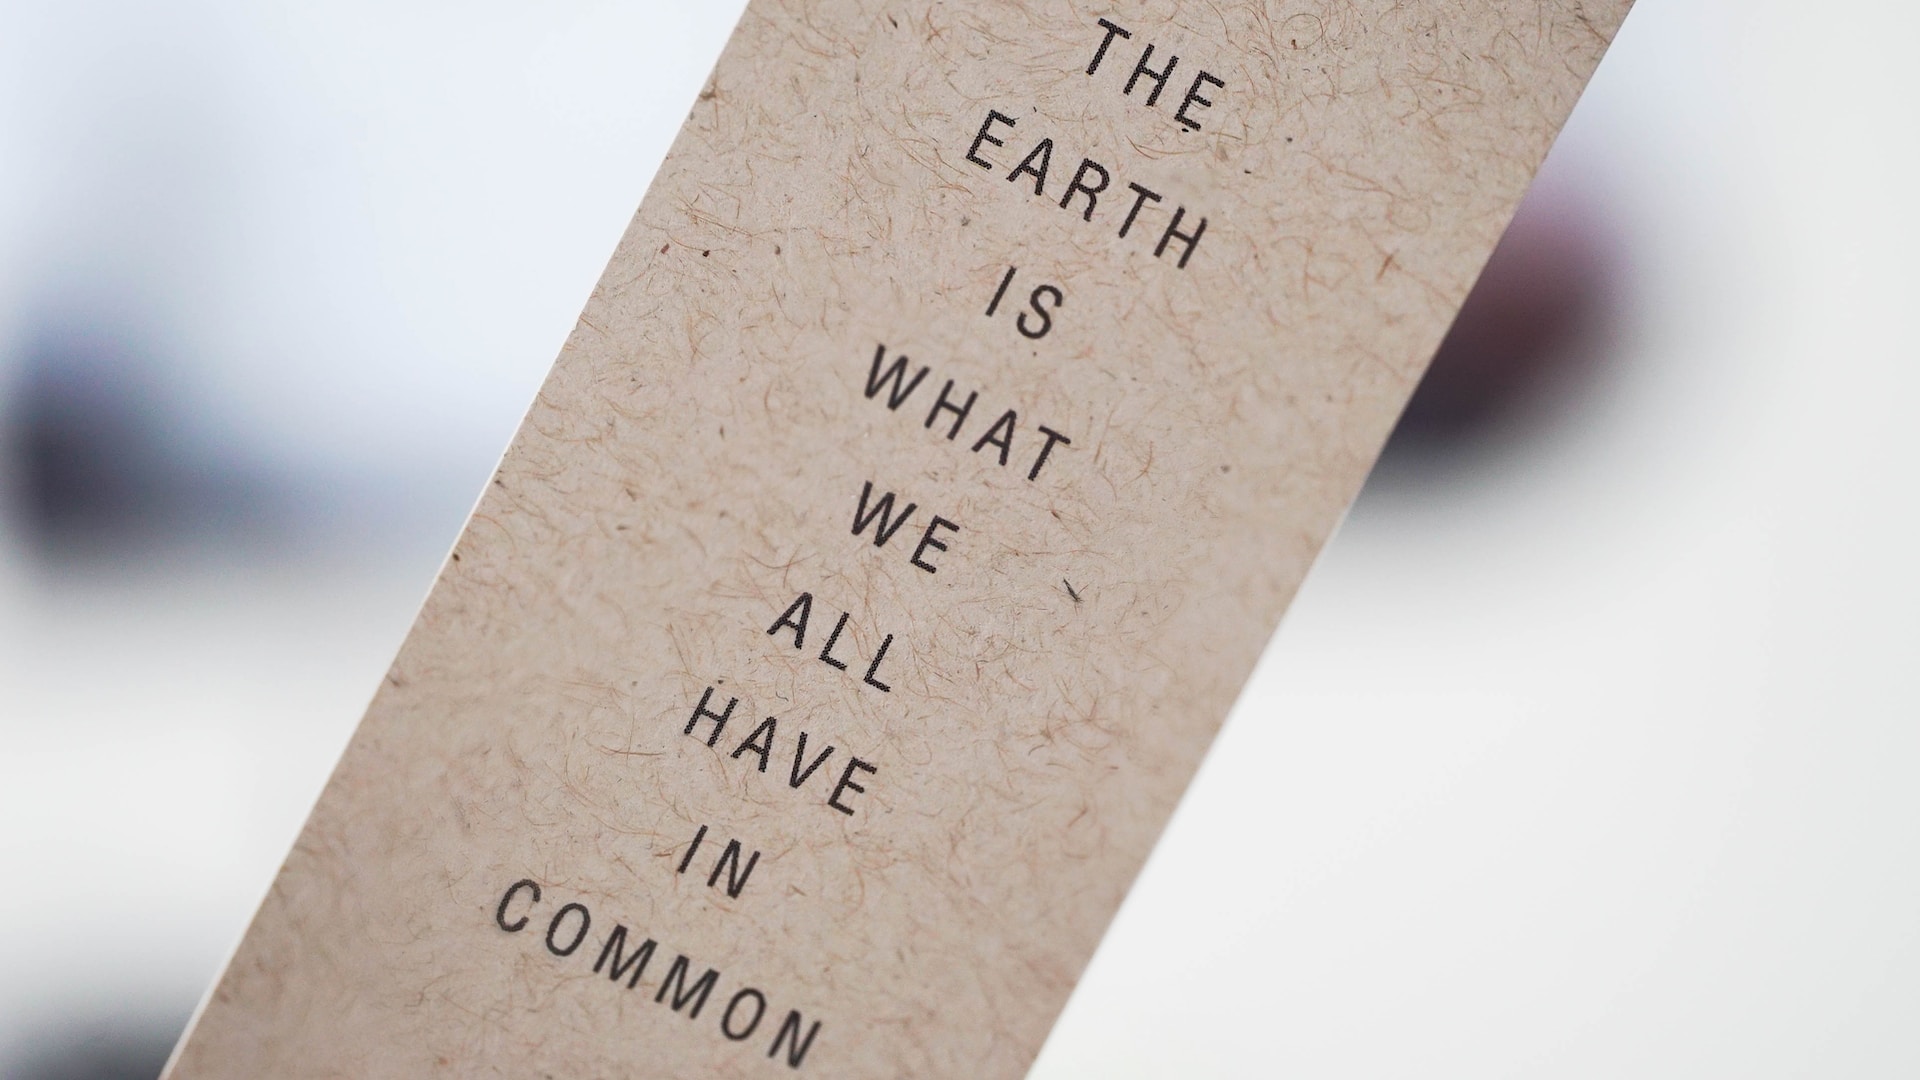 The Earth is what we have in common